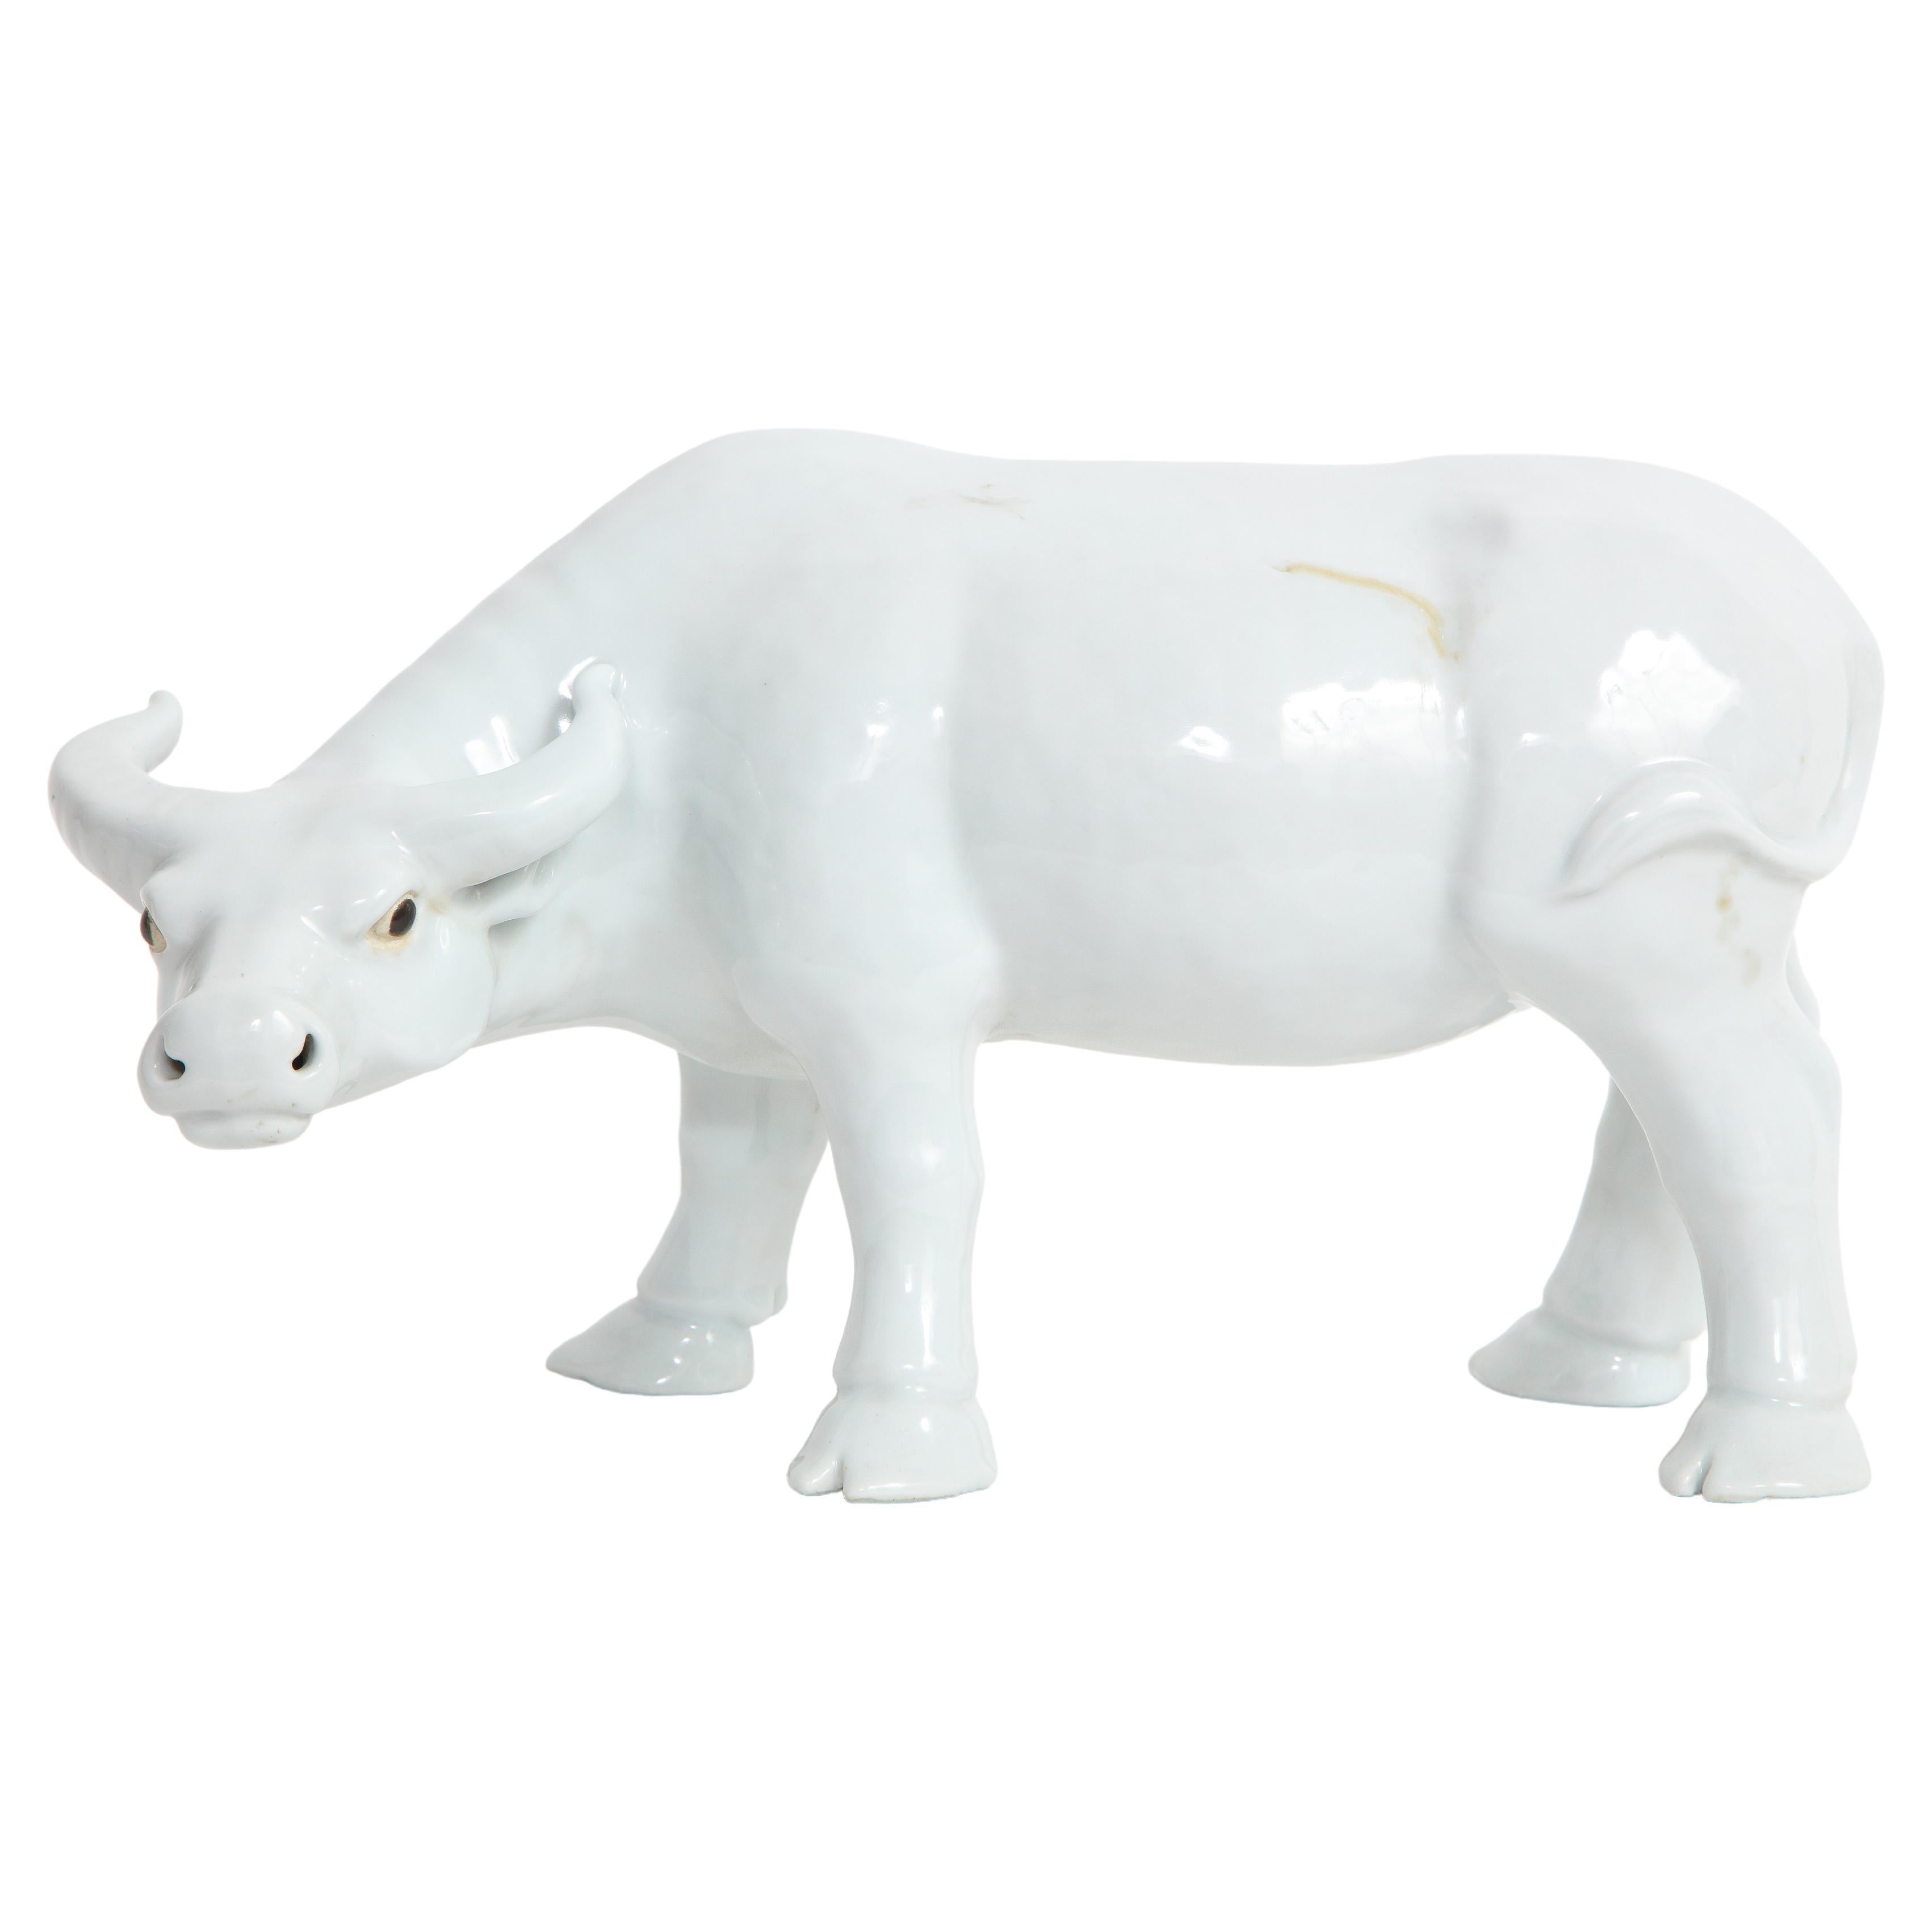 Fantastic 19th Century Chinese Blanc De Chine Model of a Water Buffalo or Ox